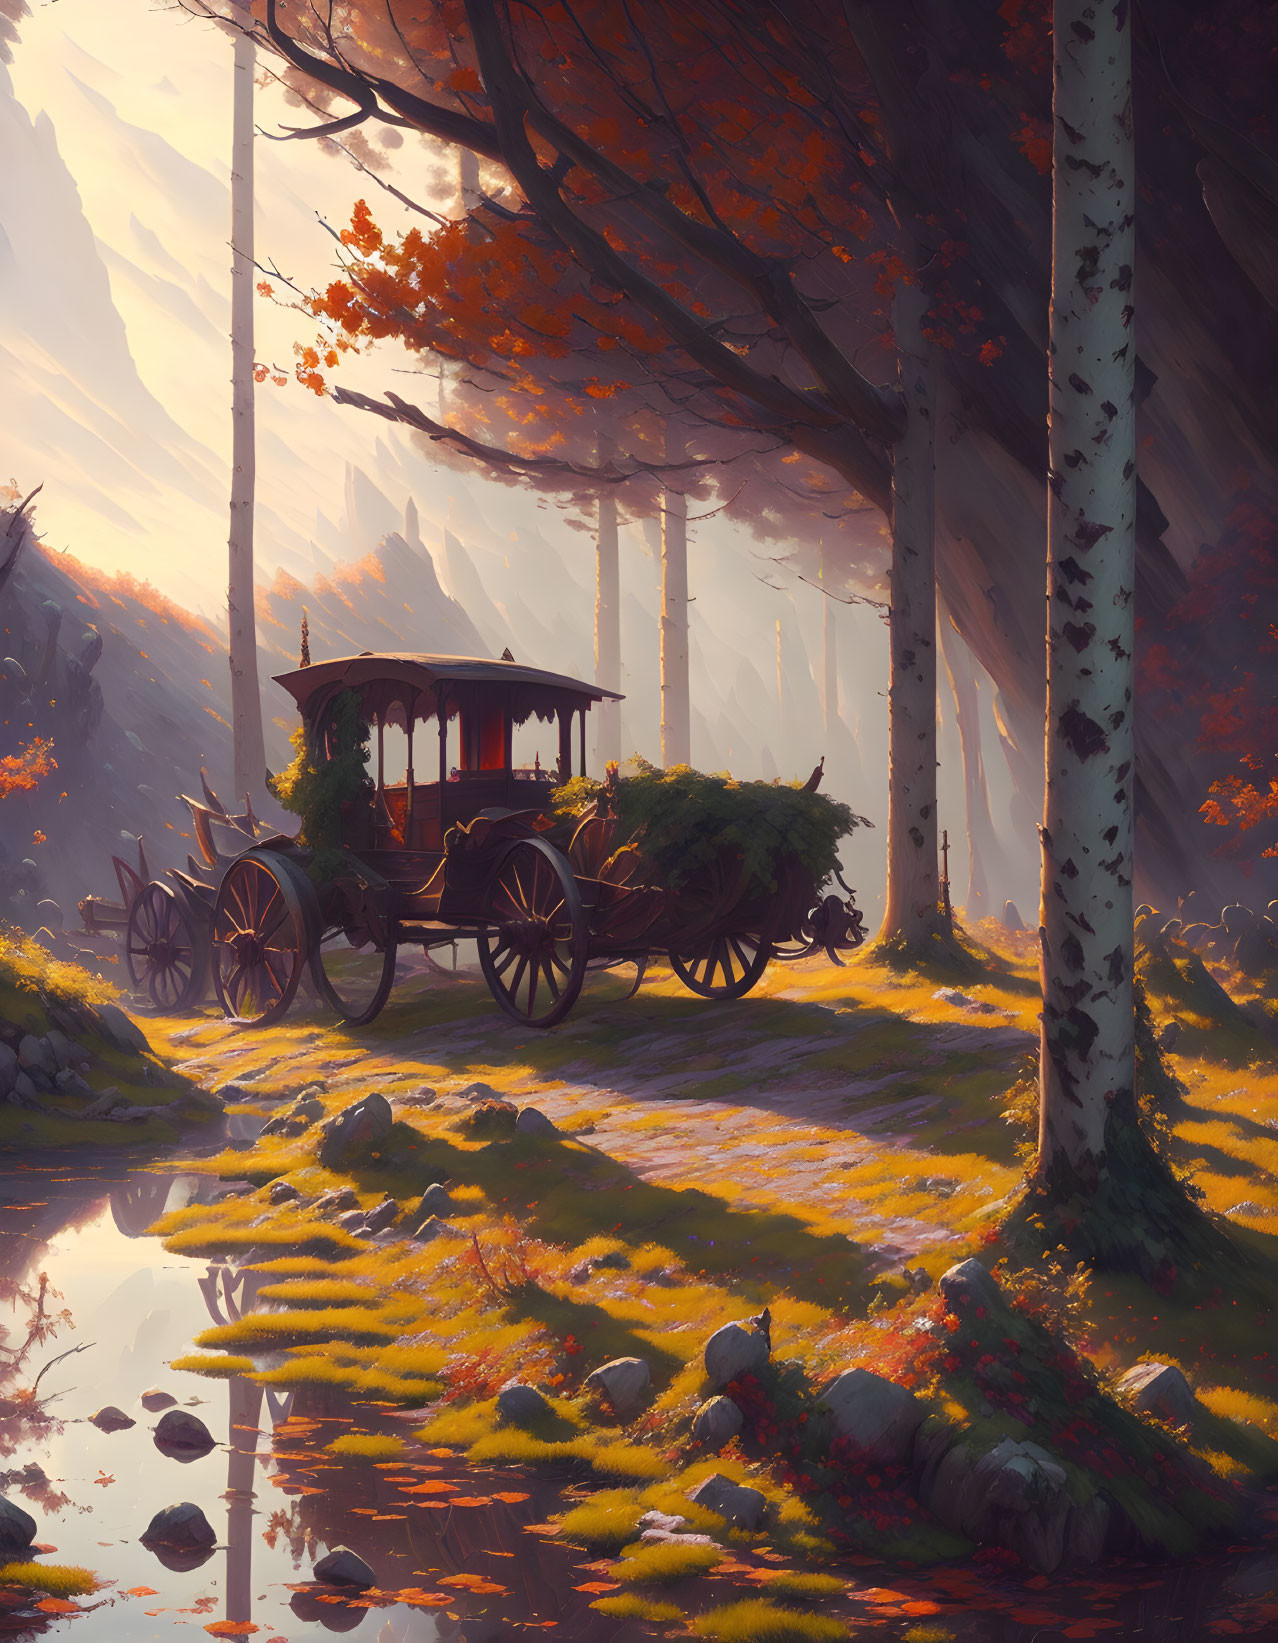 Rustic wooden cart with hay under autumn trees in misty forest